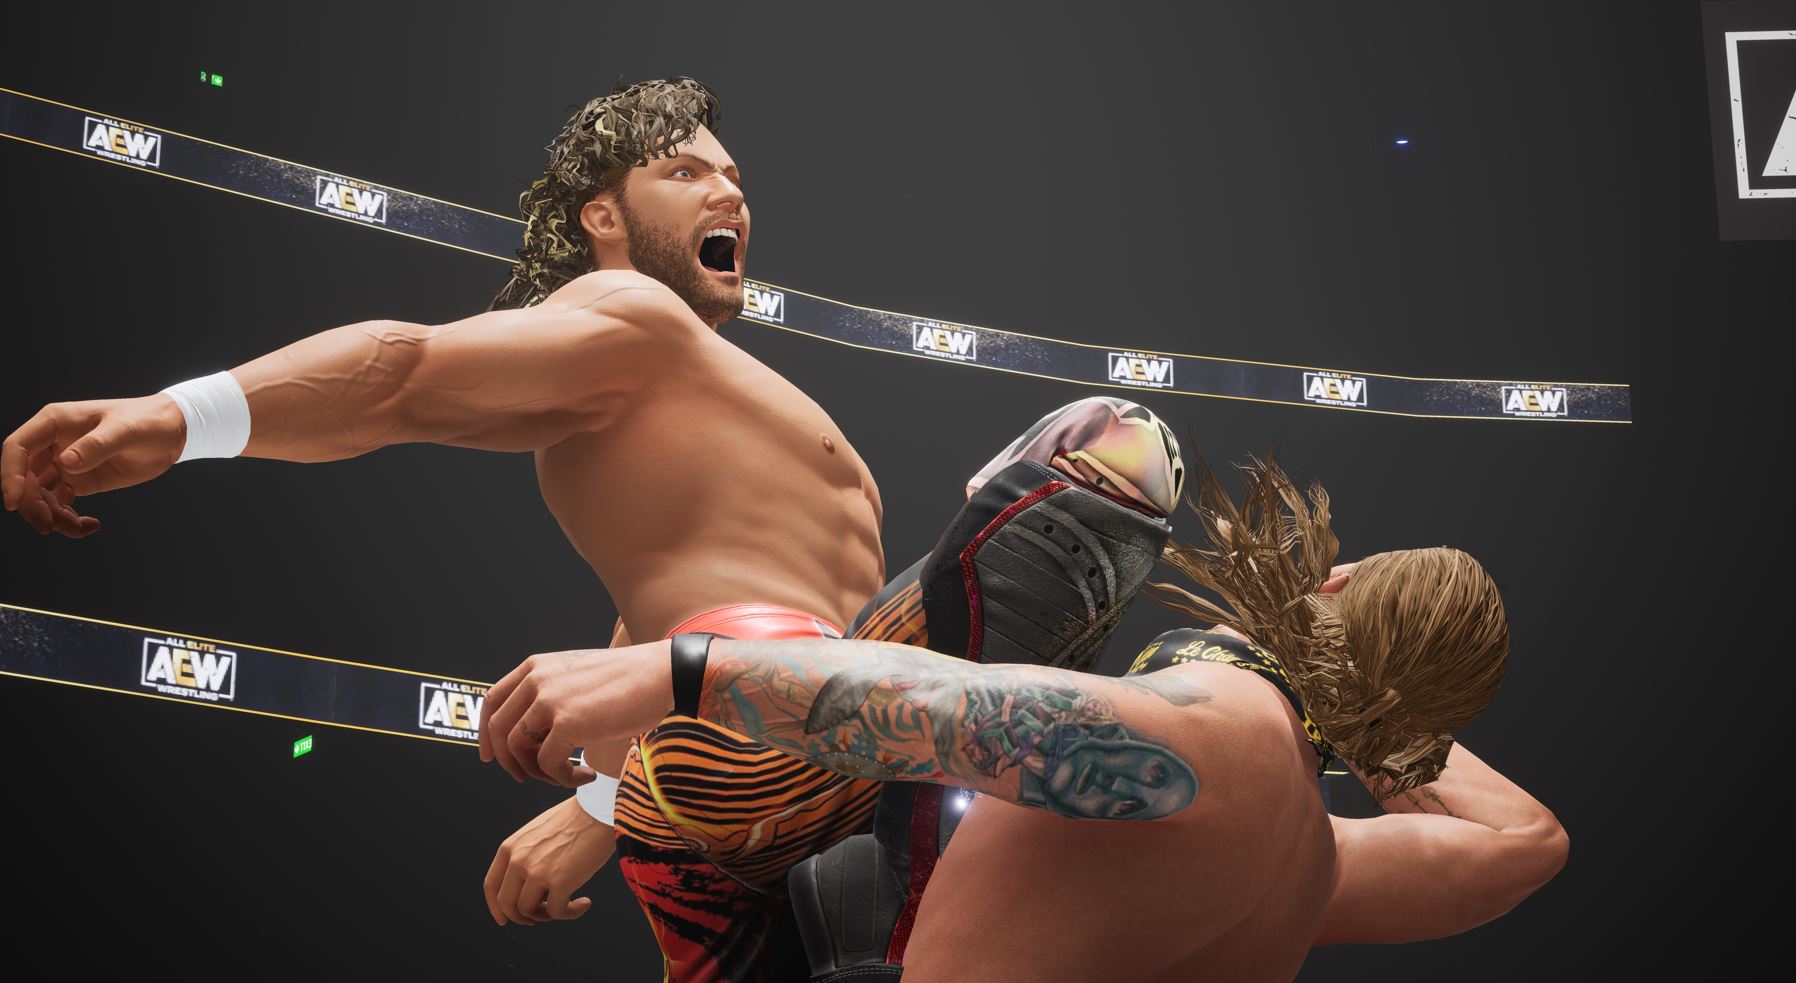 AEW Fight delivers Forever cost nostalgia Digital Trends a N64 | at